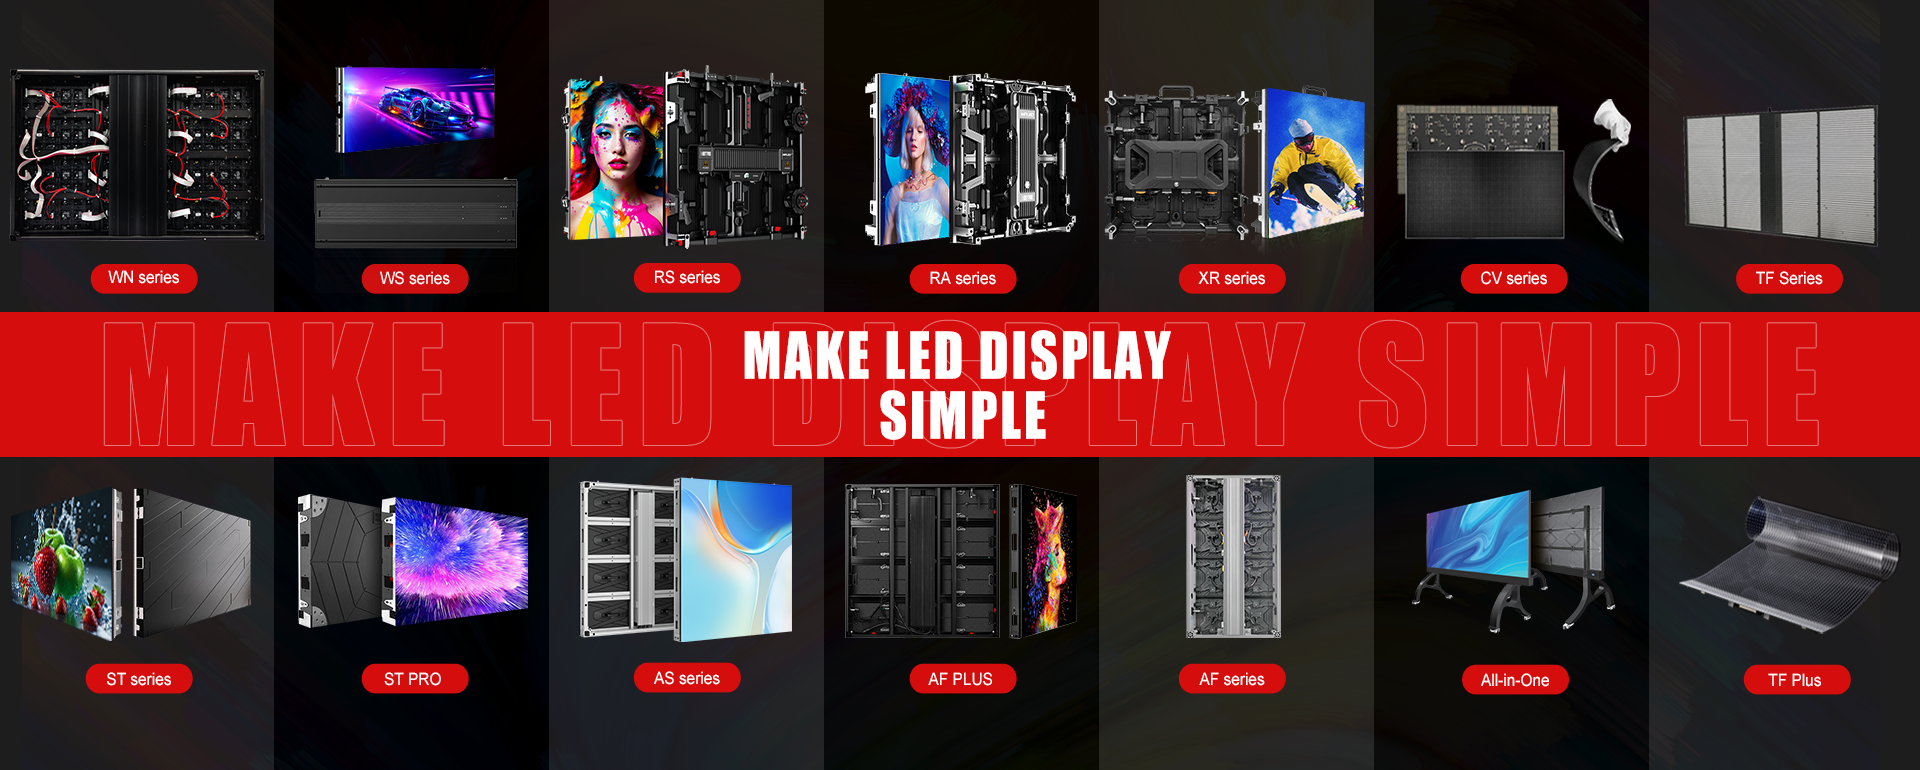 MPLED Outdoor led display screen